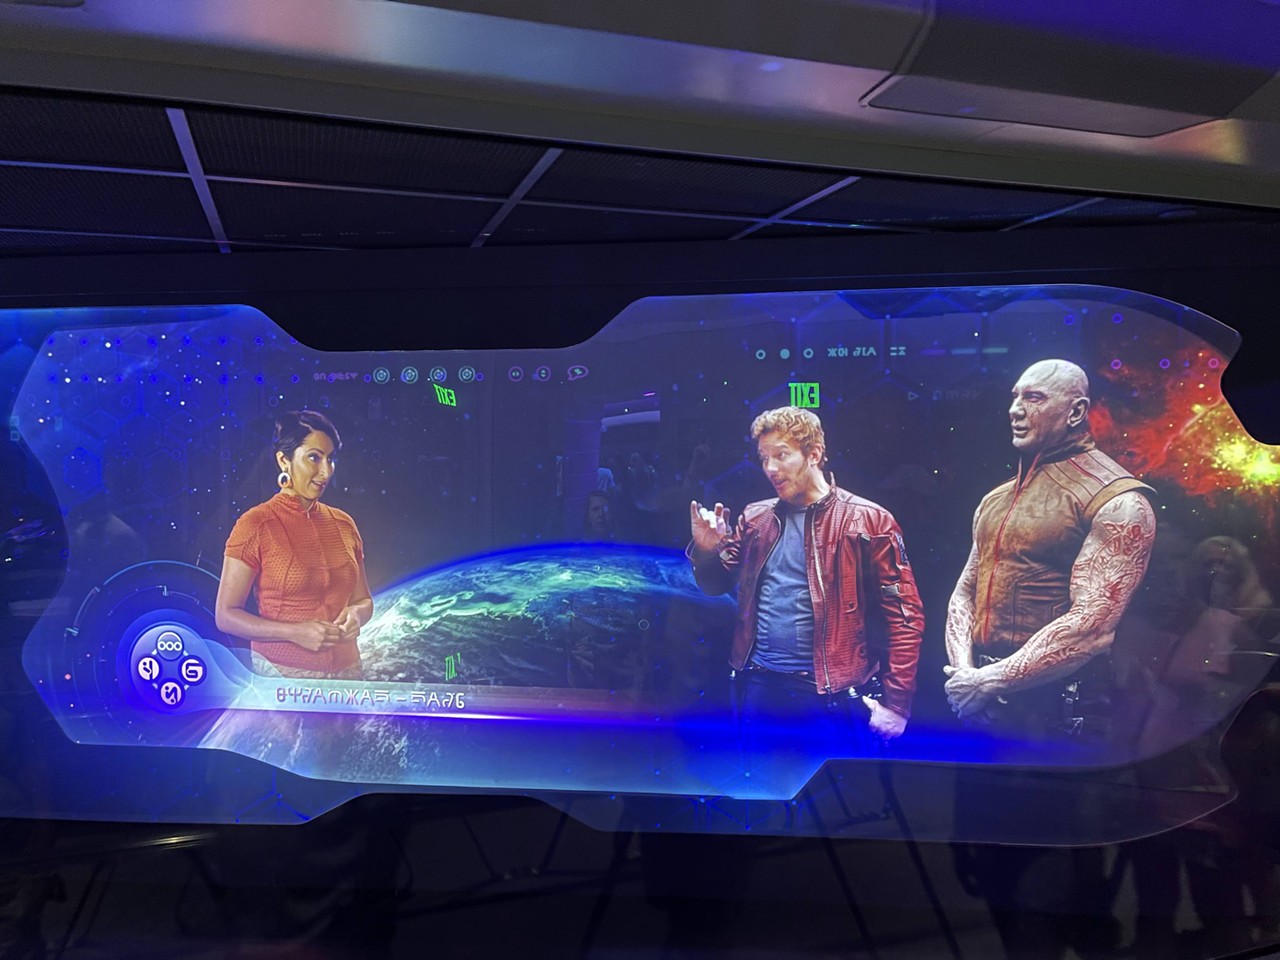 Look inside the recently opened Guardians of the Galaxy: Cosmic Rewind ride at Epcot